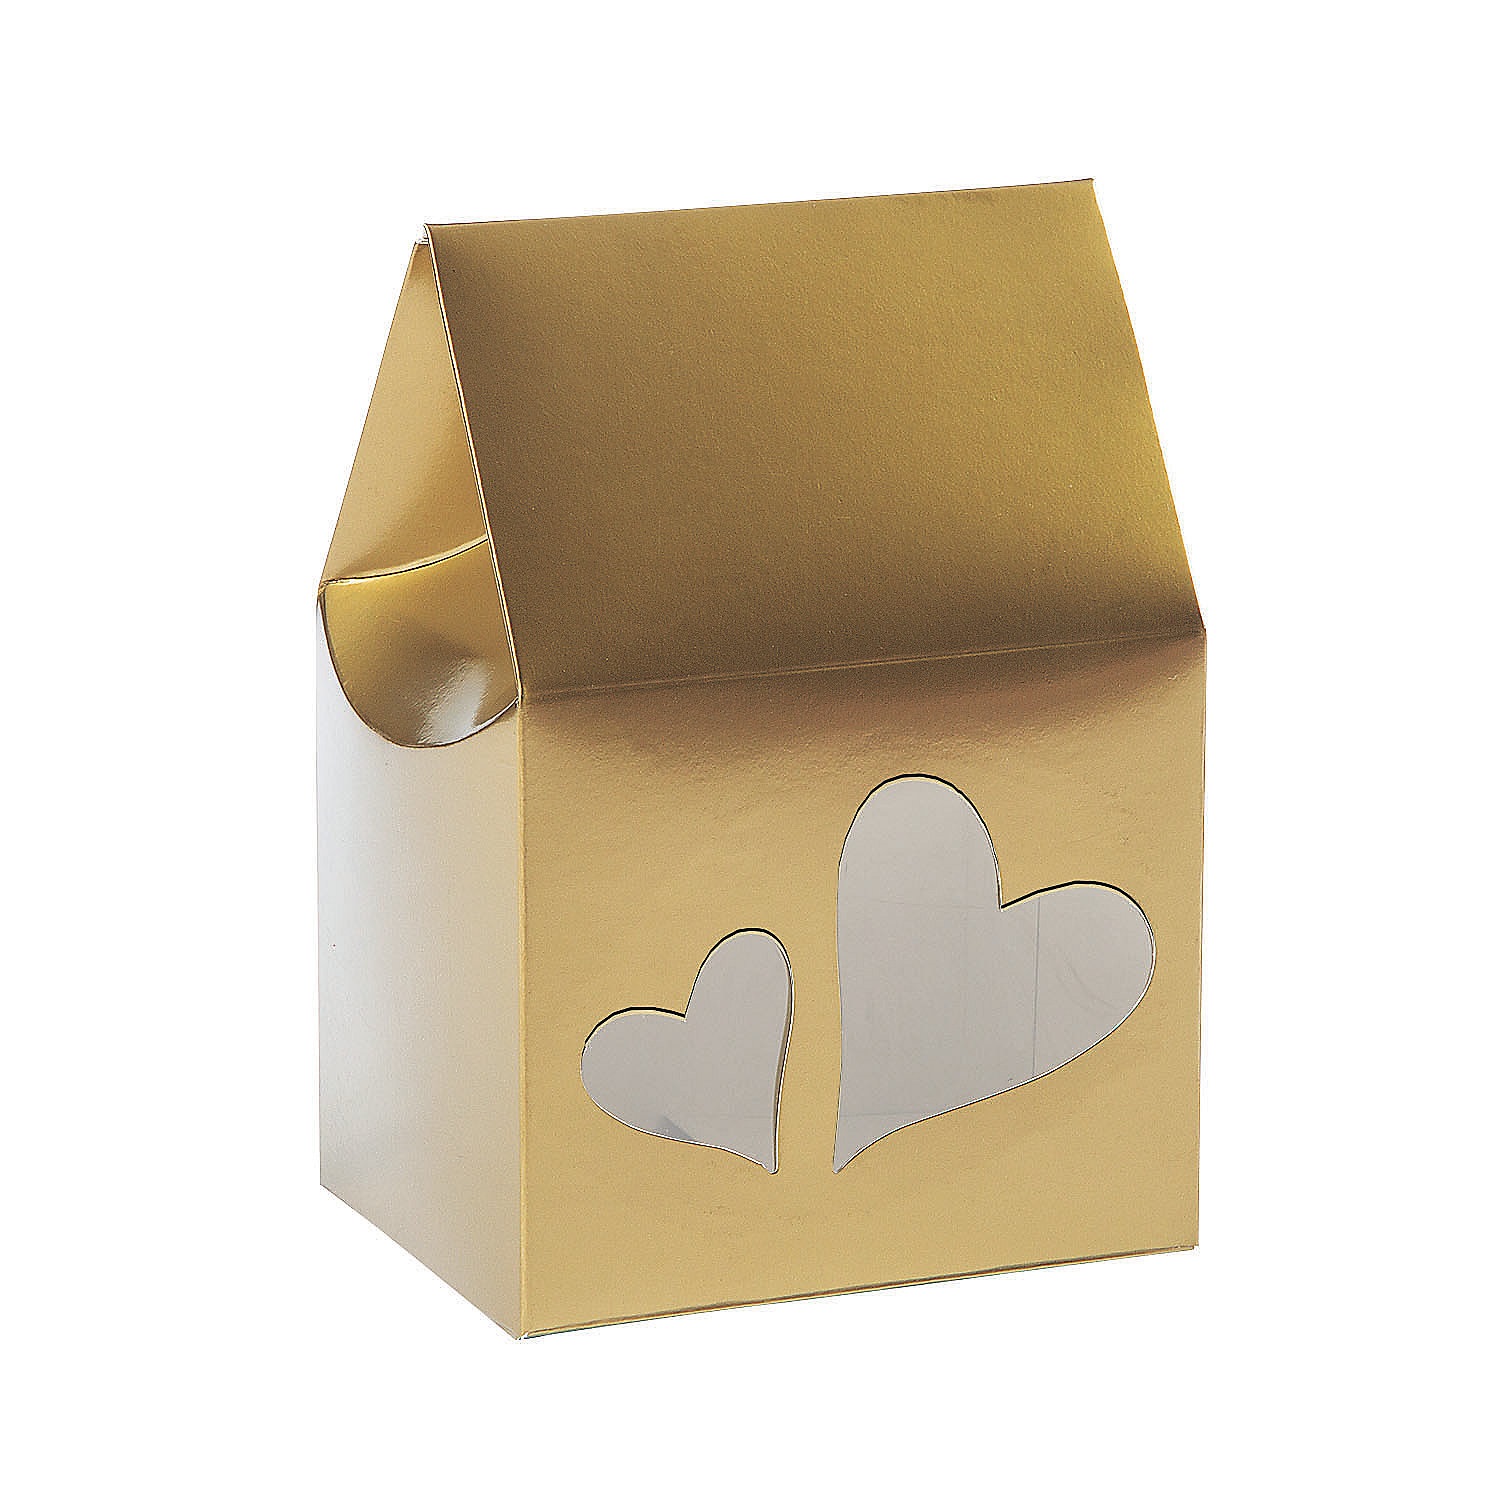 gold-favor-boxes-with-heart-cutouts-12-pc-_13937336